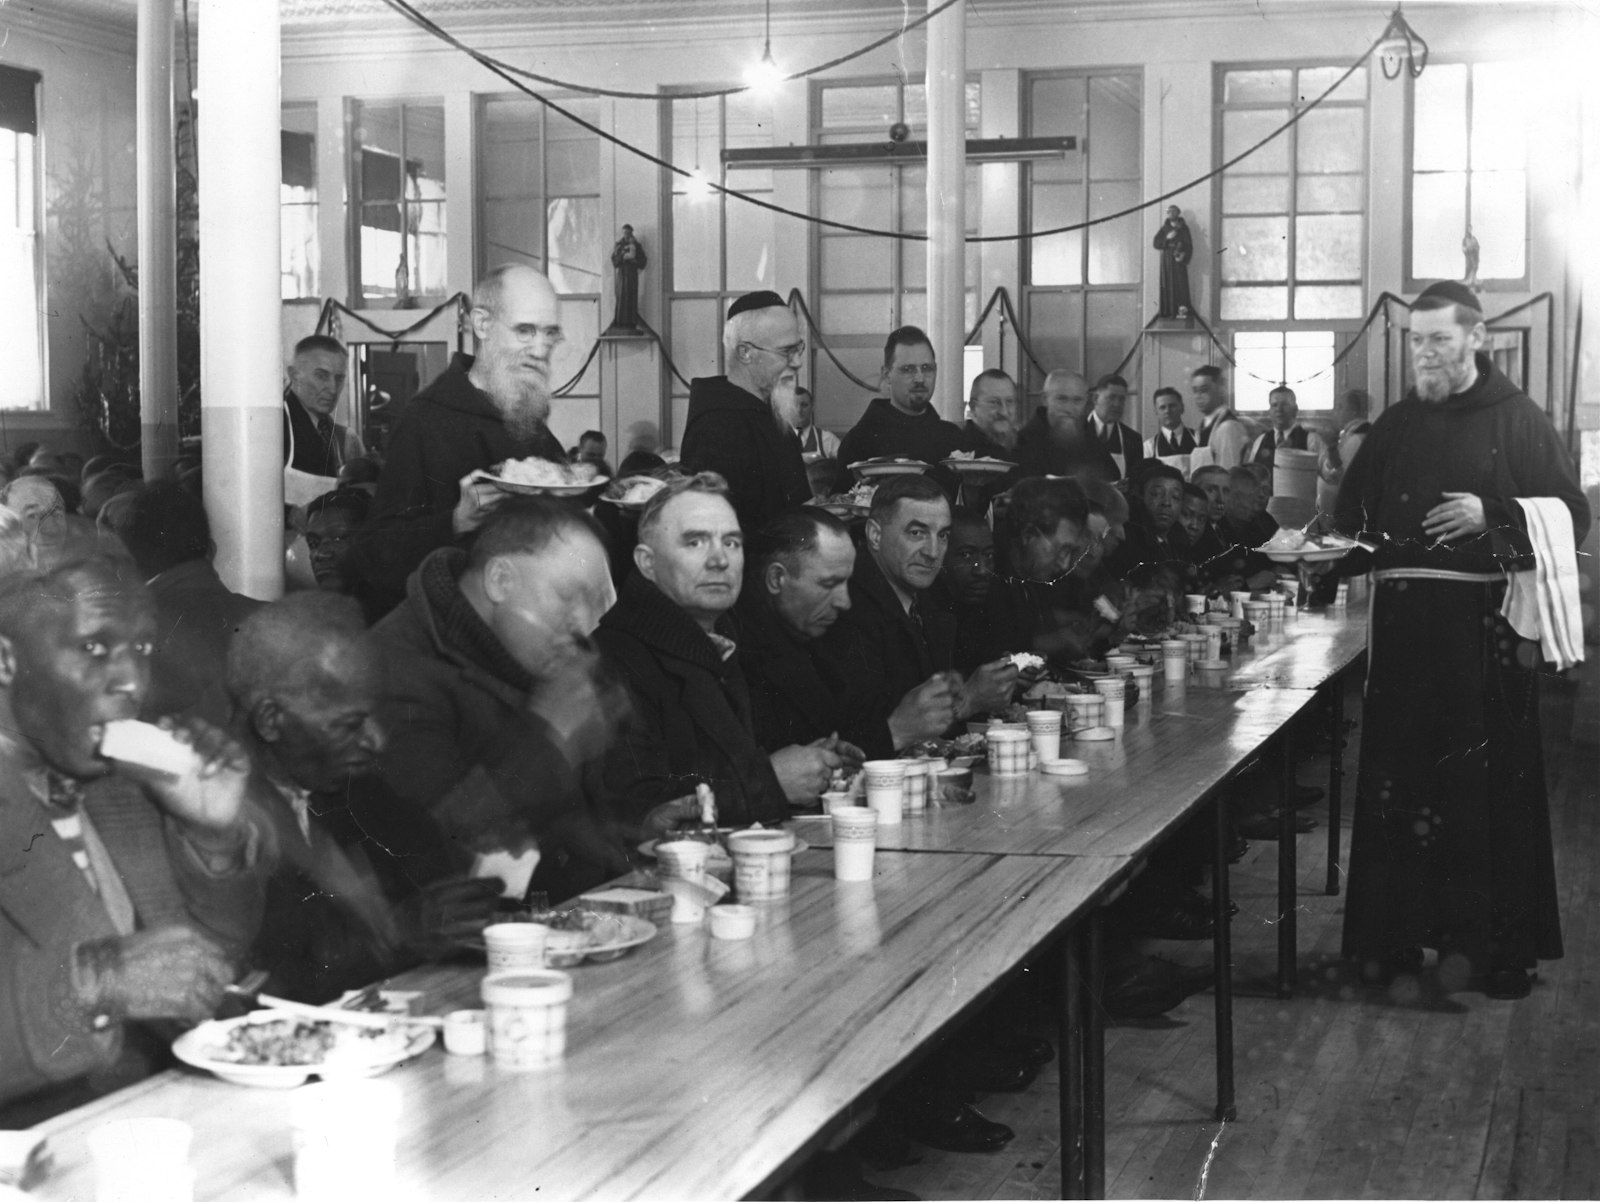 Blessed Solanus Casey is pictured among the friars and volunteers serving guests in this undated photo. The Capuchin Soup Kitchen was founded by Fr. Herman Buss, OFM Cap., who served as the kitchen's first director. (Photo courtesy of the Capuchin Franciscan Province of St. Joseph)